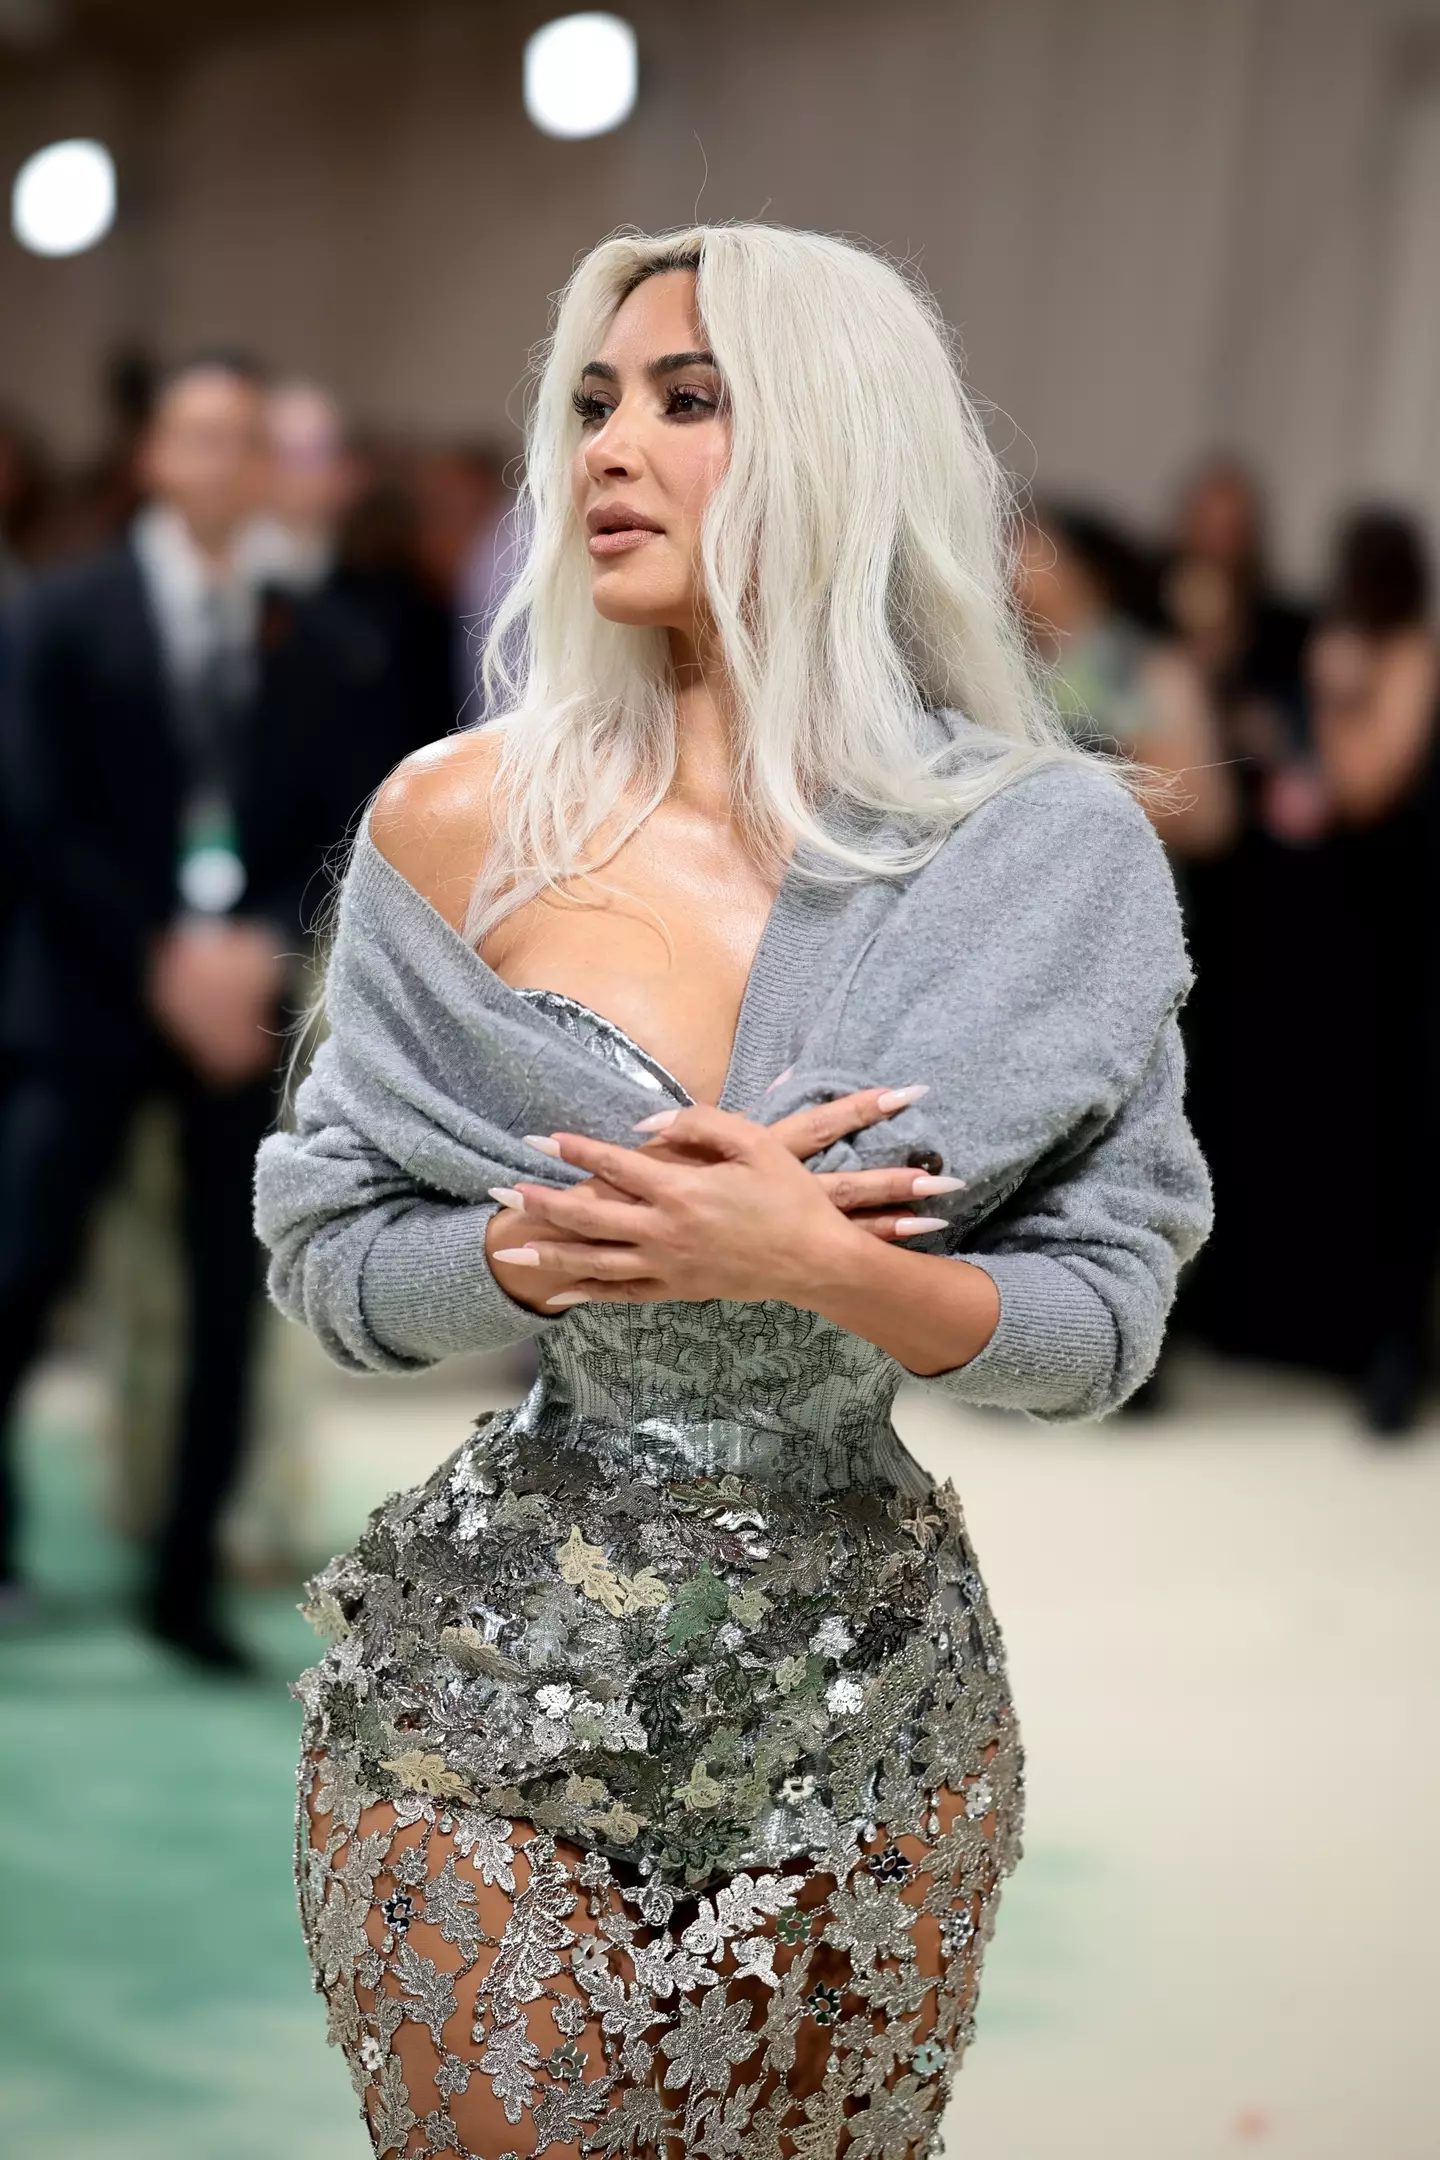 Fans were alarmed by Kim's dress (Dimitrios Kambouris/Getty Images for The Met Museum/Vogue)